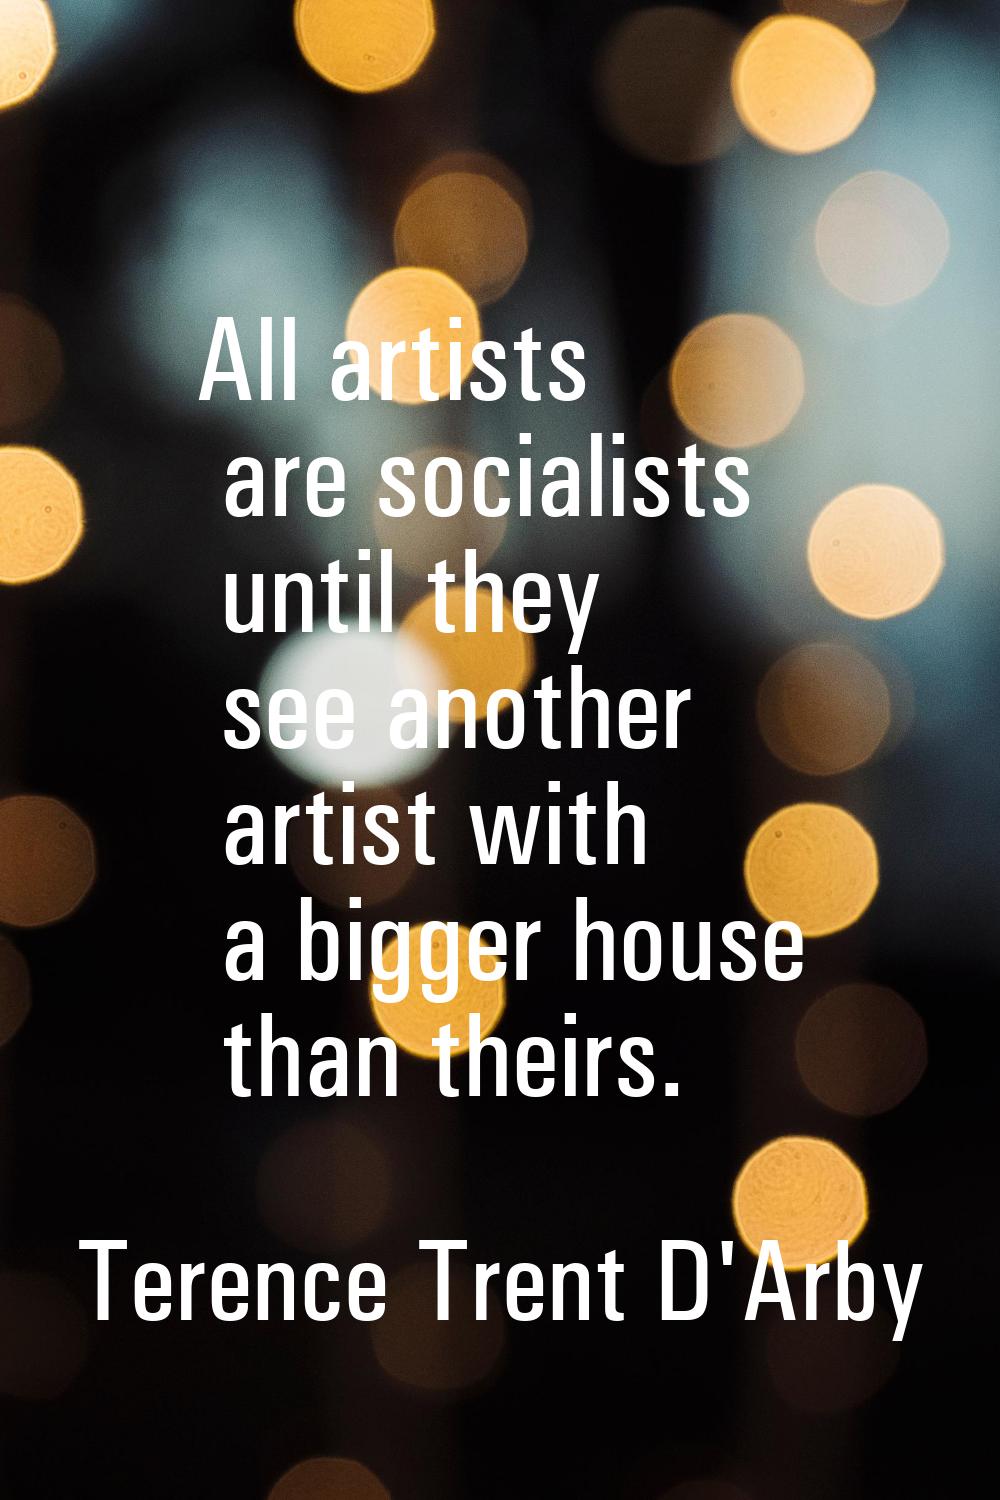 All artists are socialists until they see another artist with a bigger house than theirs.